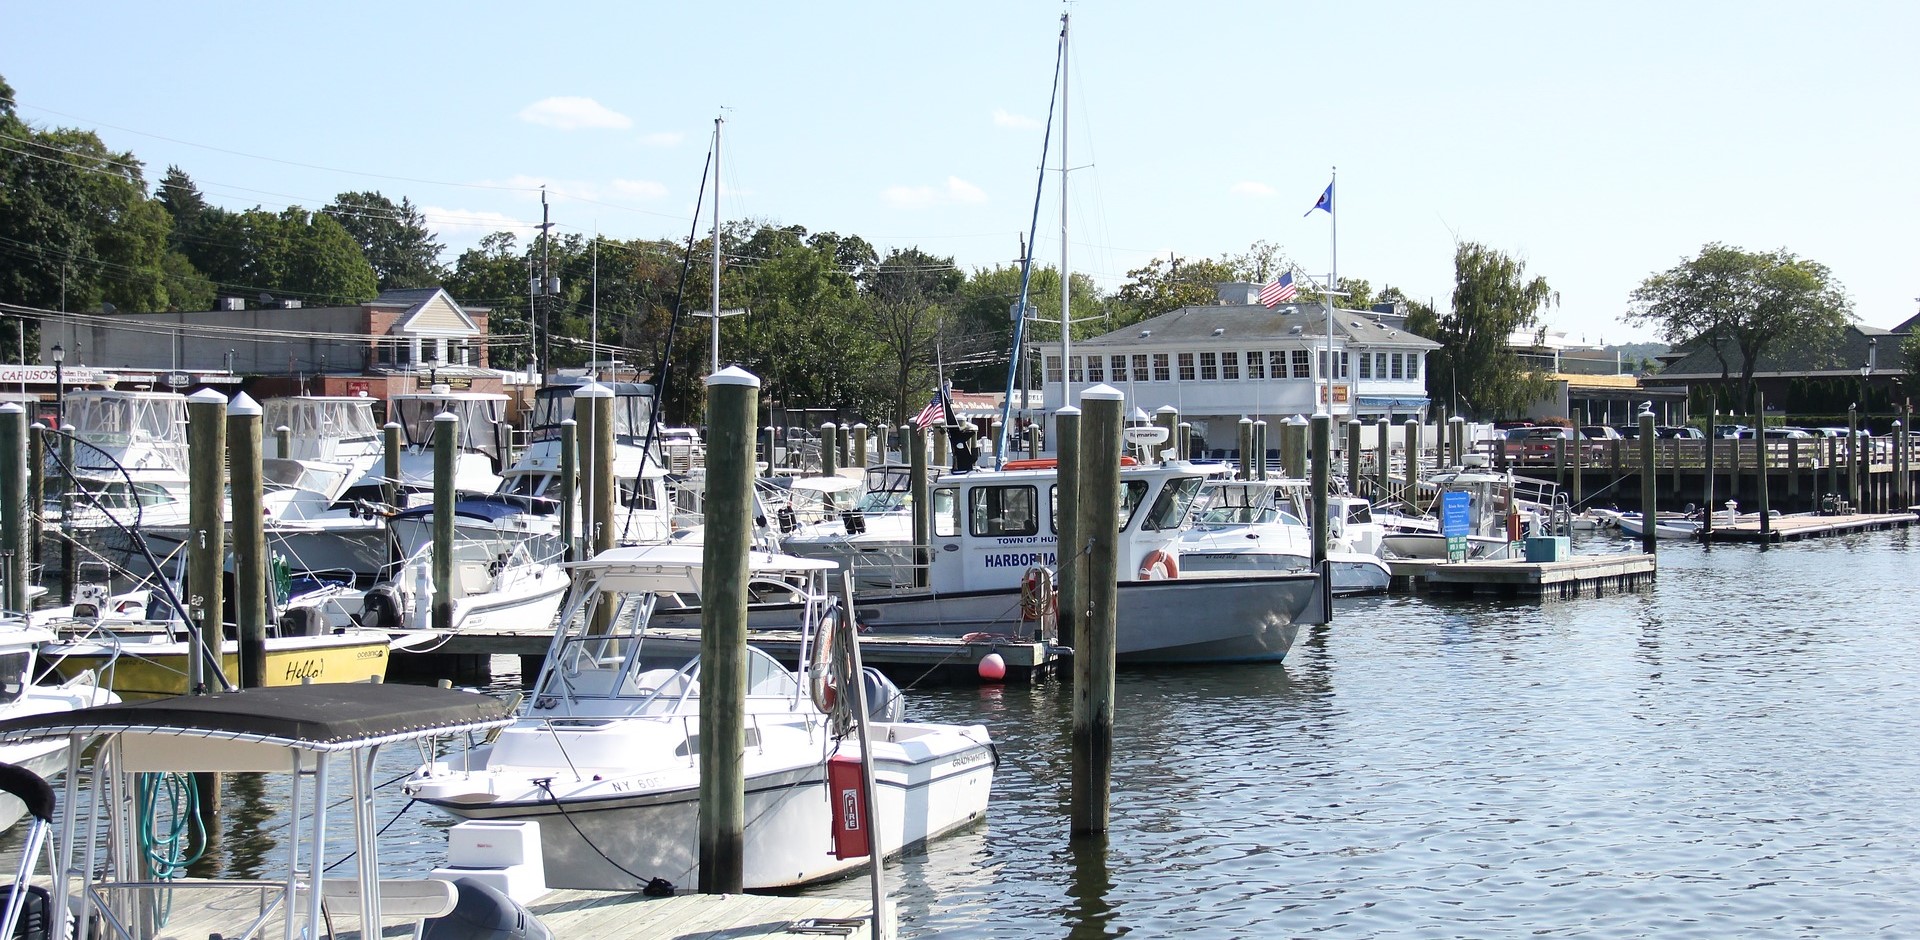 One of the Harbors in Long Island, New York | Kids Car Donations